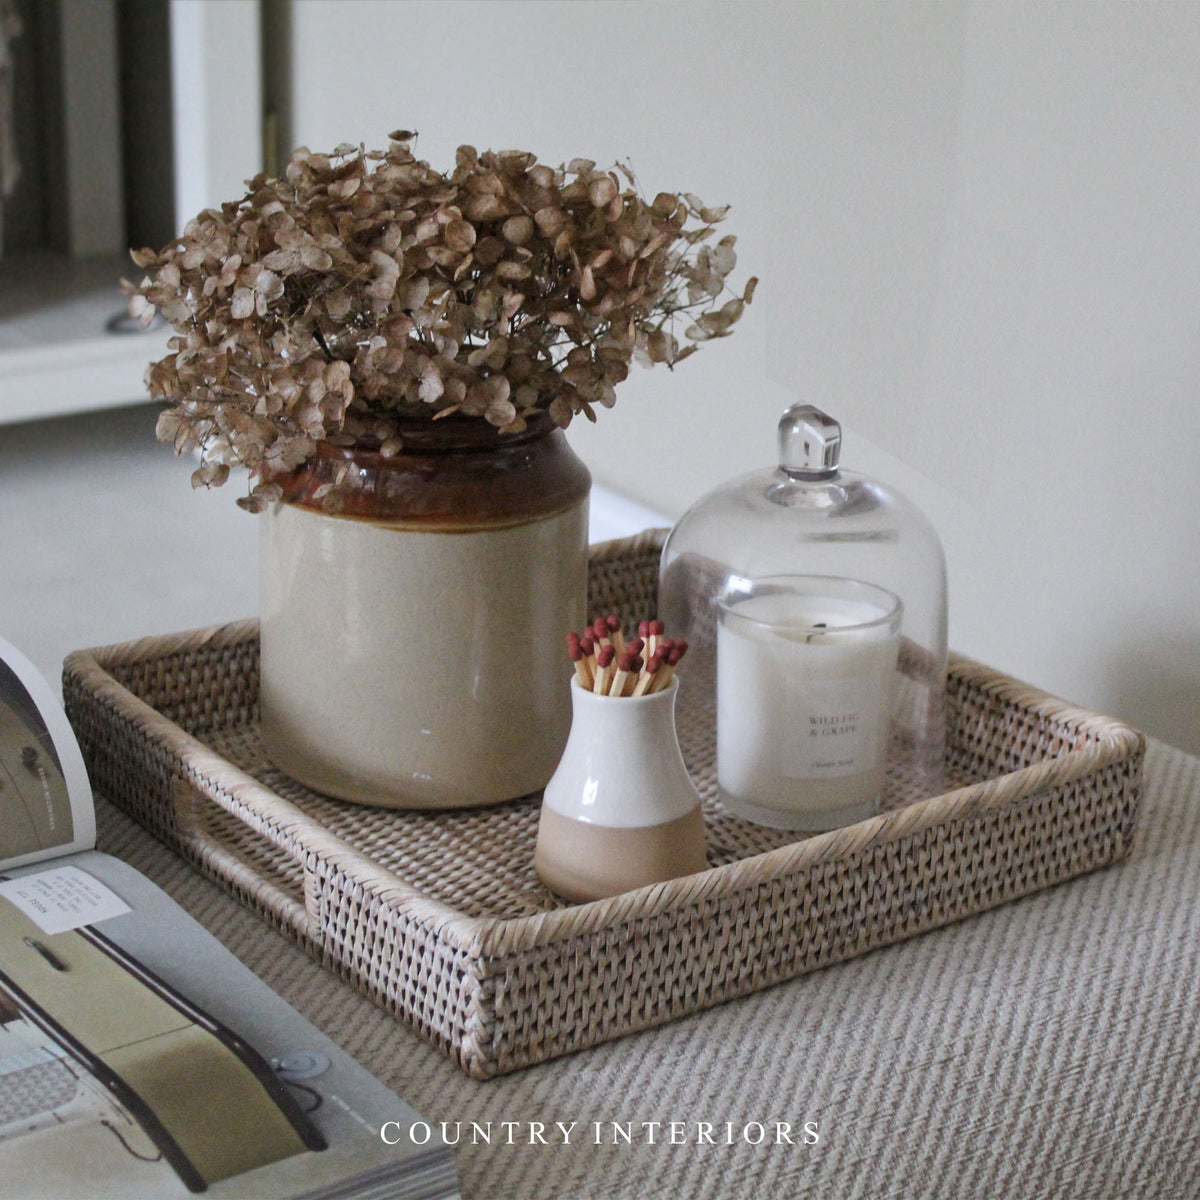 Brushed White Square Rattan Tray - Coming Soon May